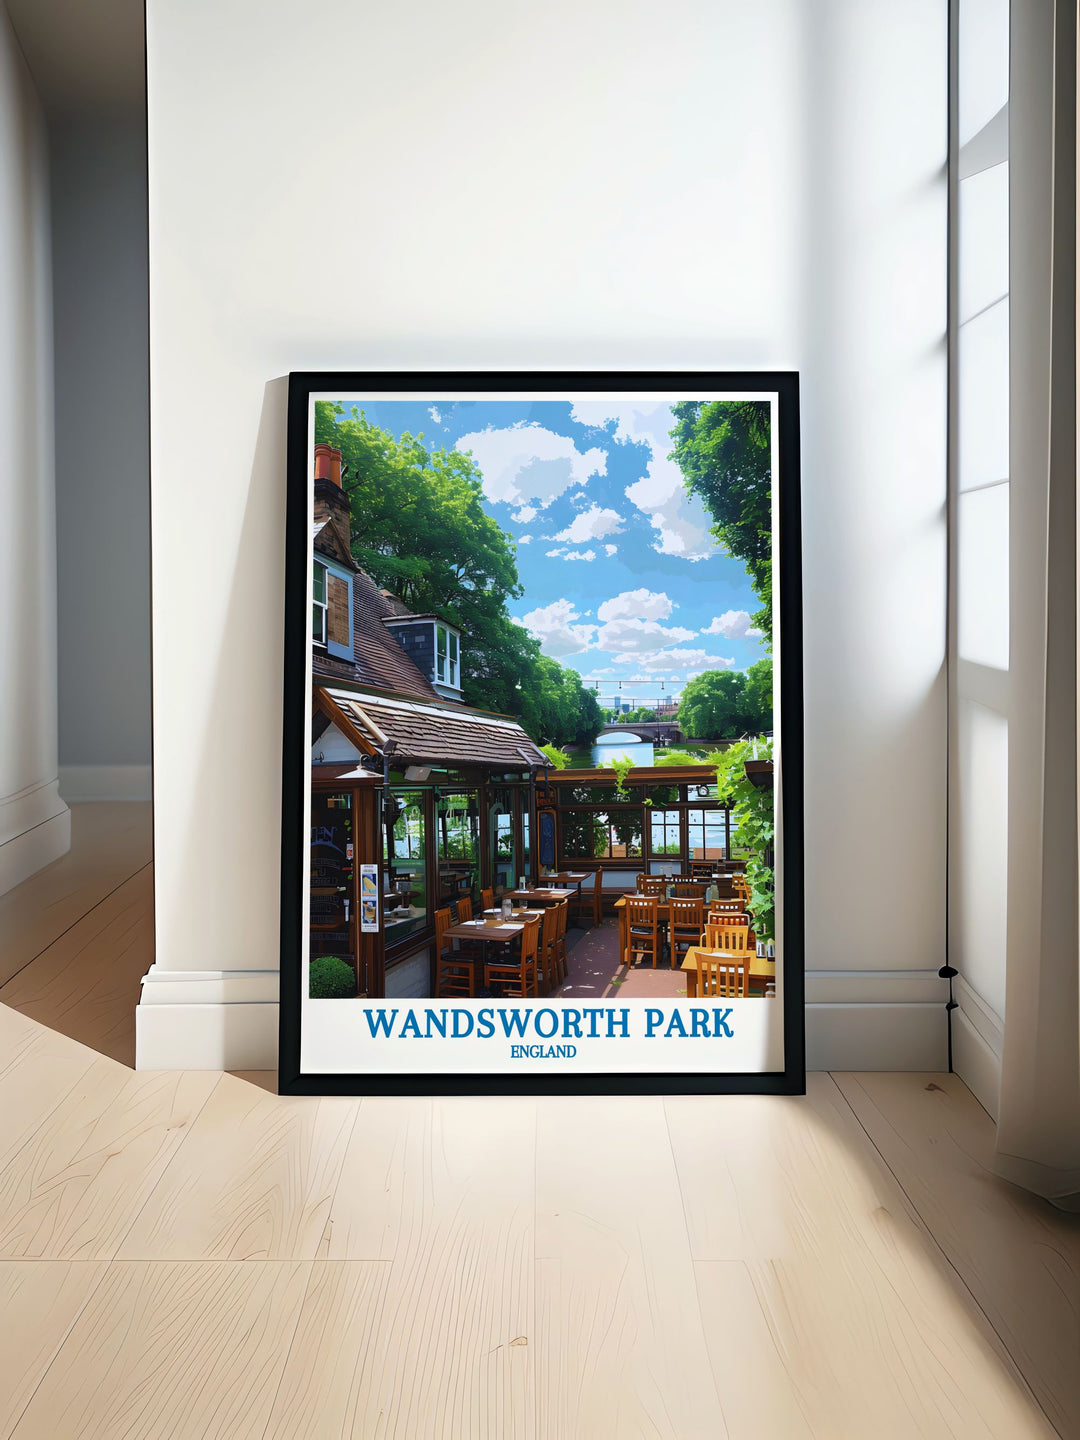 This custom print of Wandsworth Park showcases the parks tranquil beauty and historical significance. A personalized piece that adds a unique touch of Londons heritage and natural charm to any decor, its perfect for those who love the citys green spaces and want to bring a piece of Wandsworths tranquility into their home.